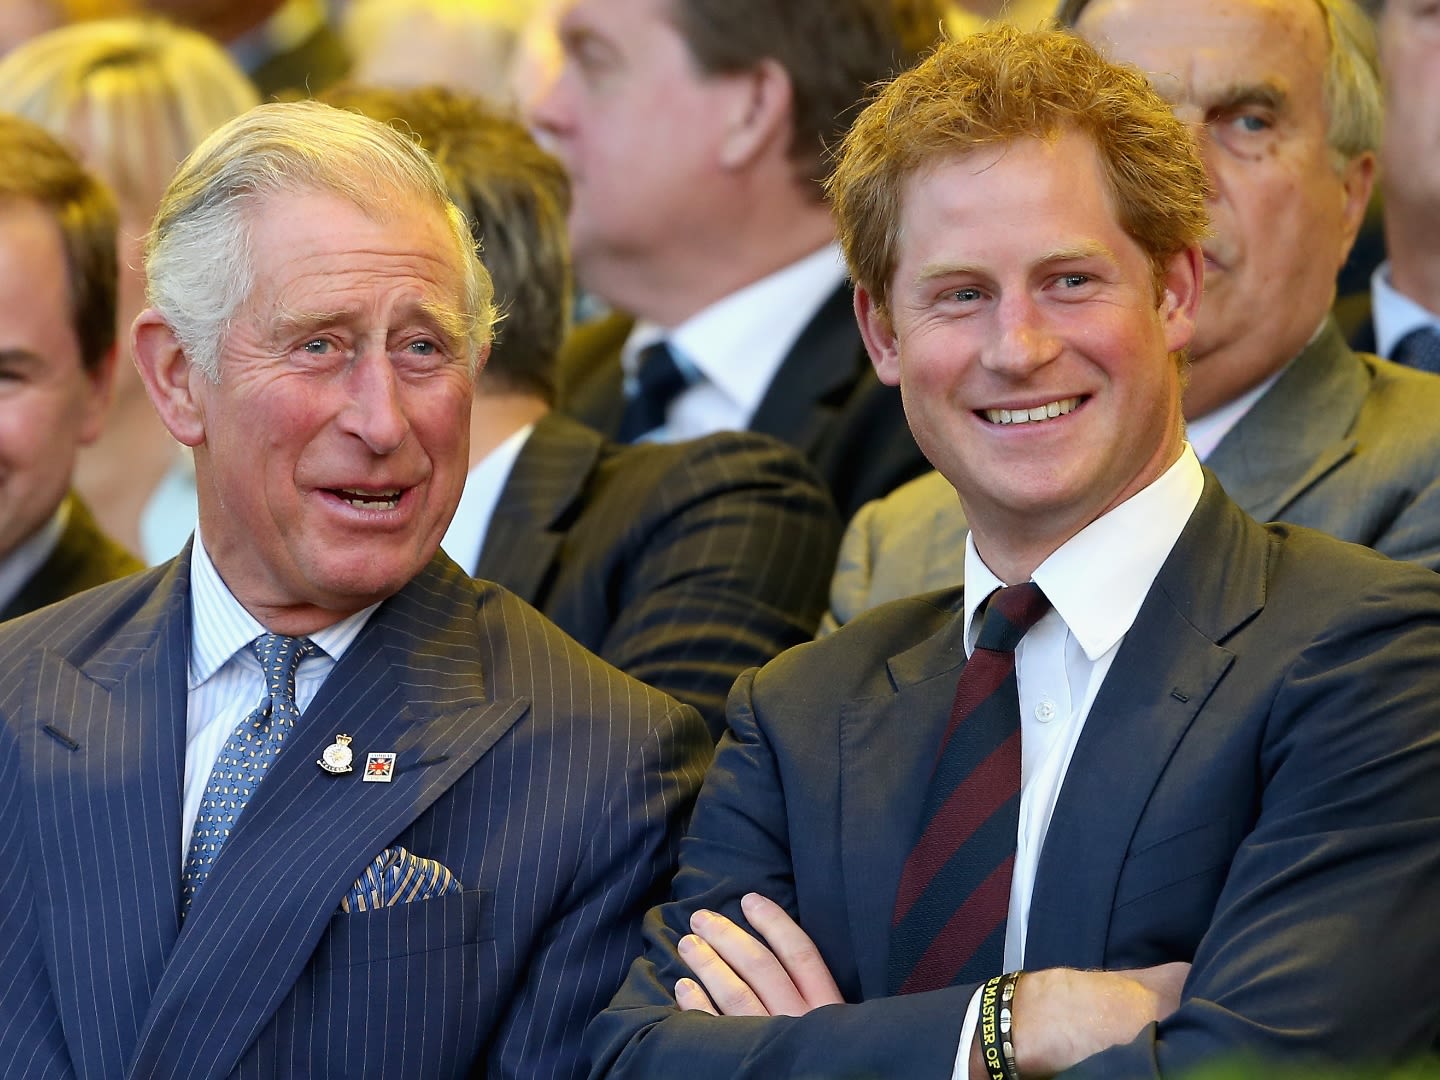 King Charles Is Reportedly Indecisive About His Prince Harry Feud Because of This Royal Influence